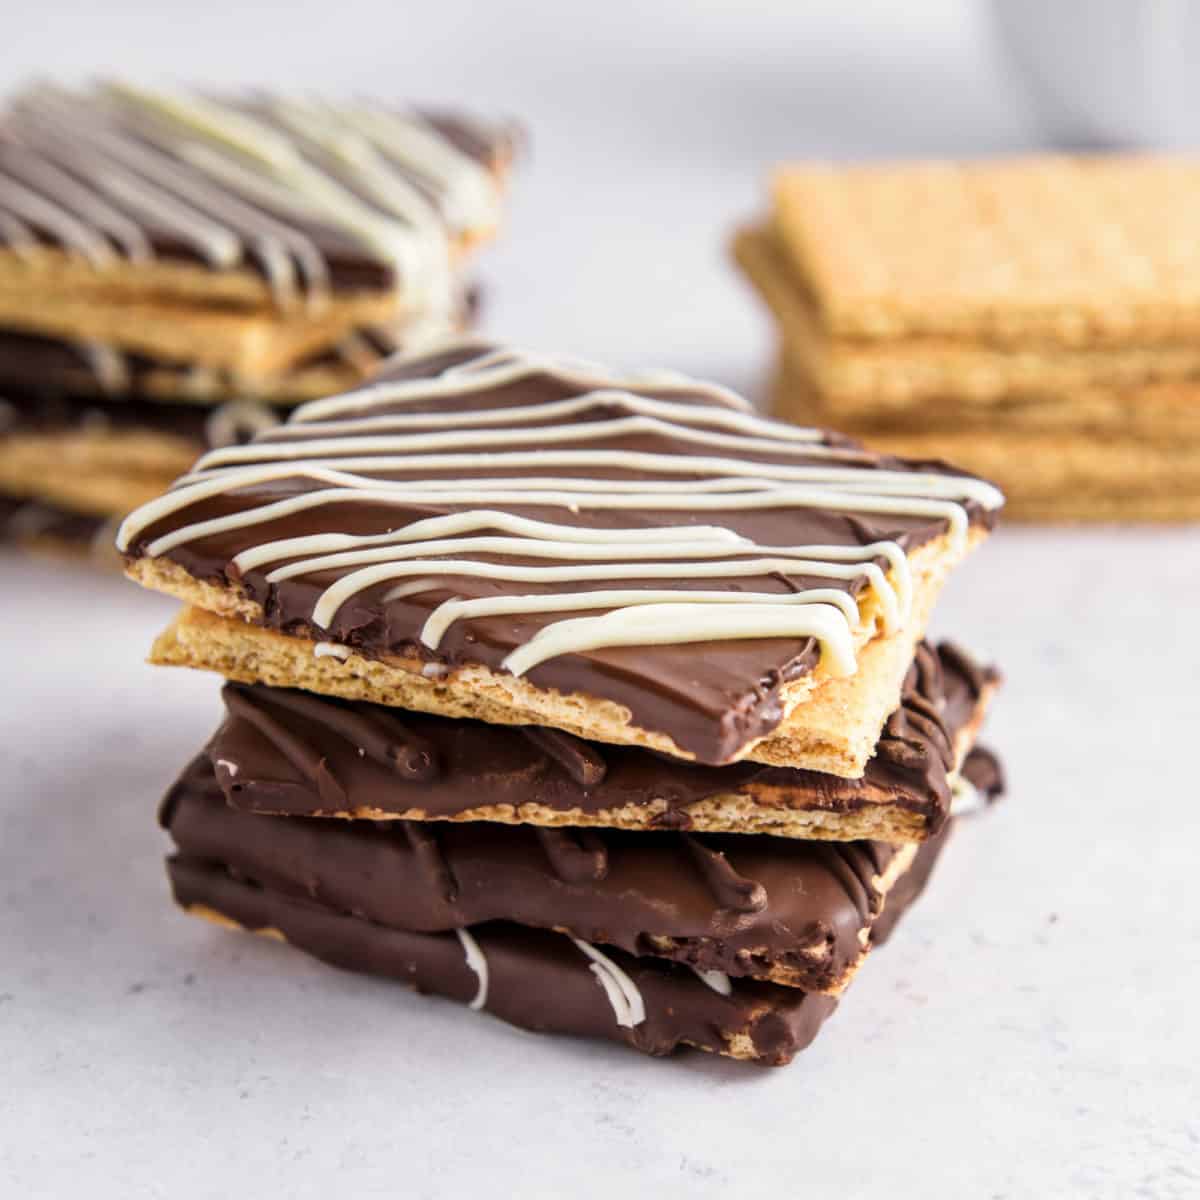 Chocolate grahams with white chocolate drizzled on top.